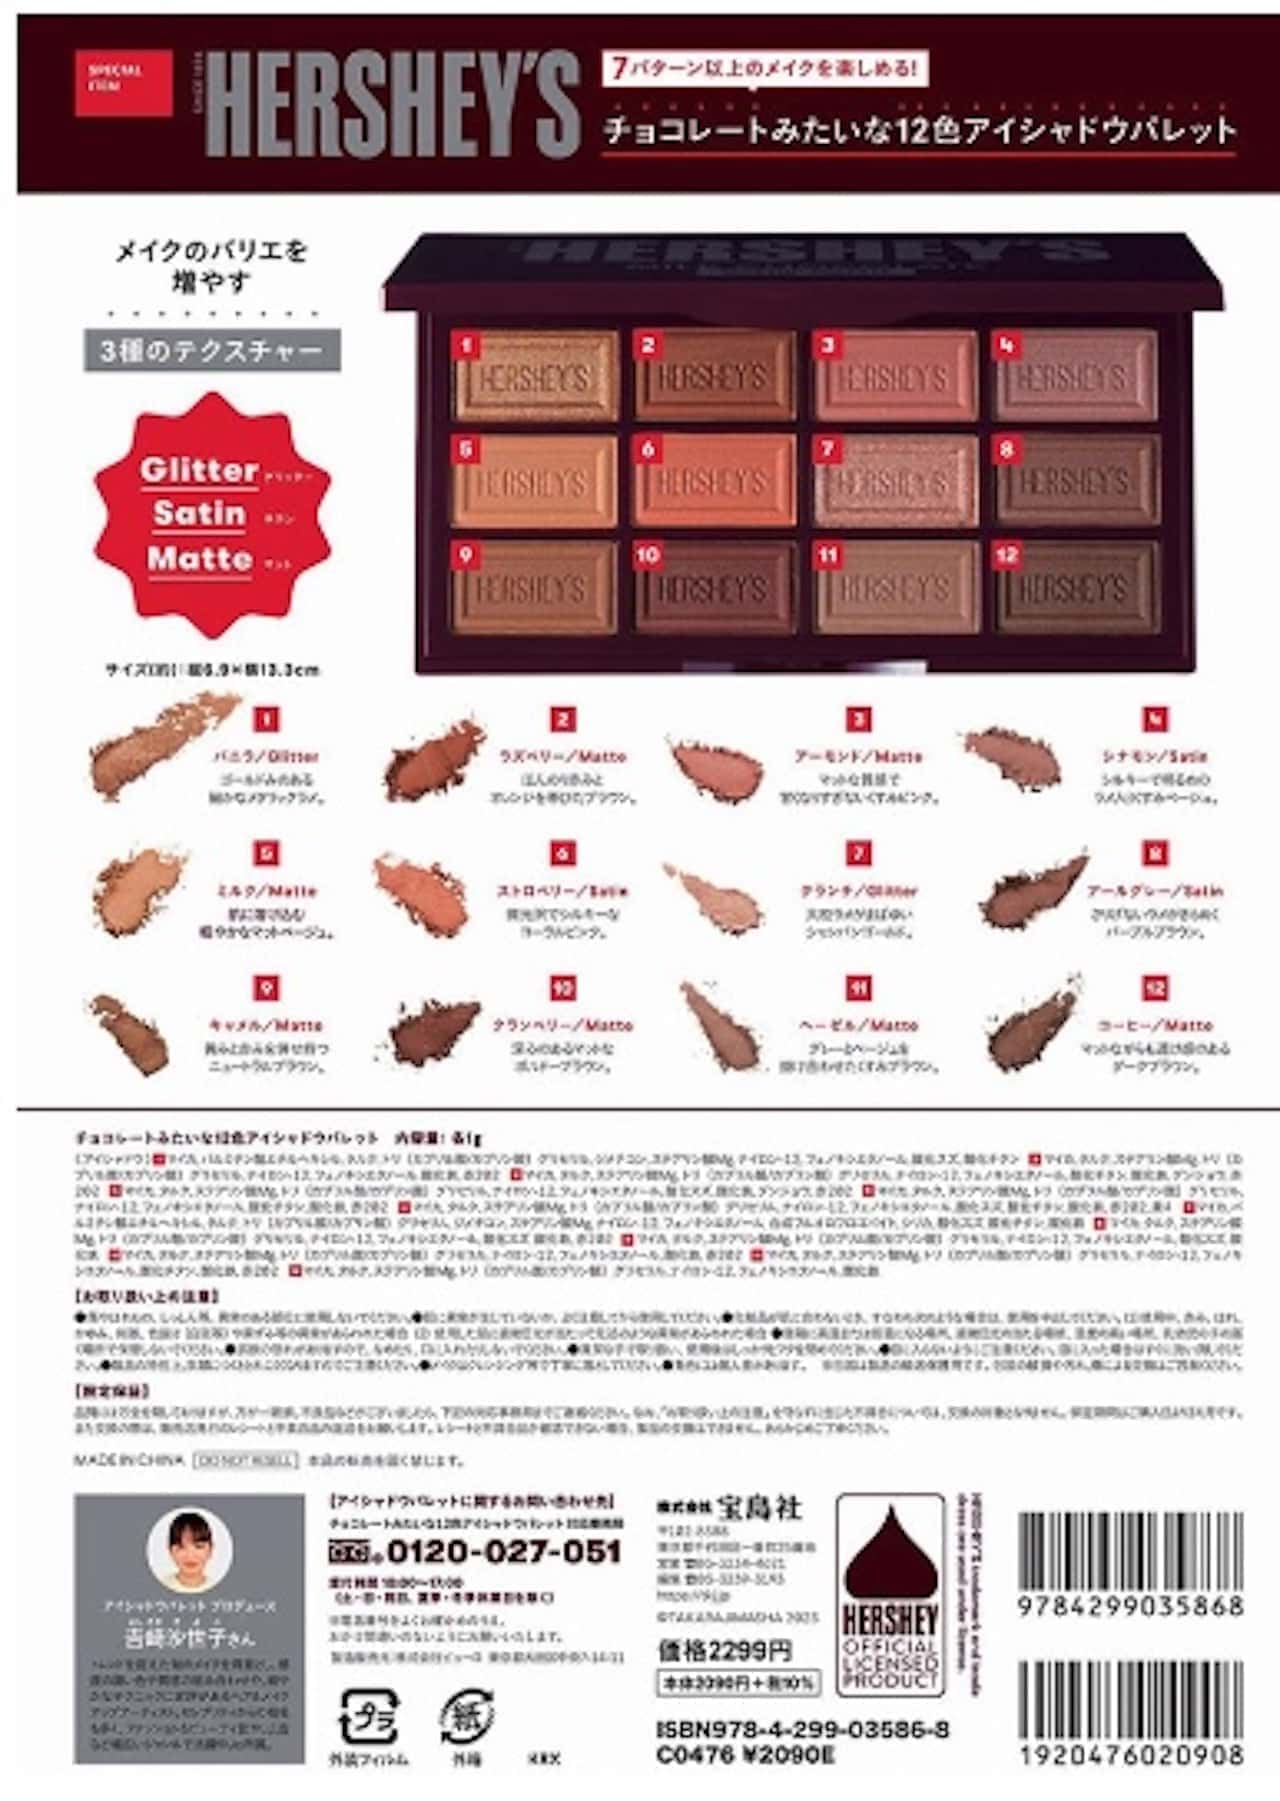 HERSHEY'S Cosmetic Palette BOOK